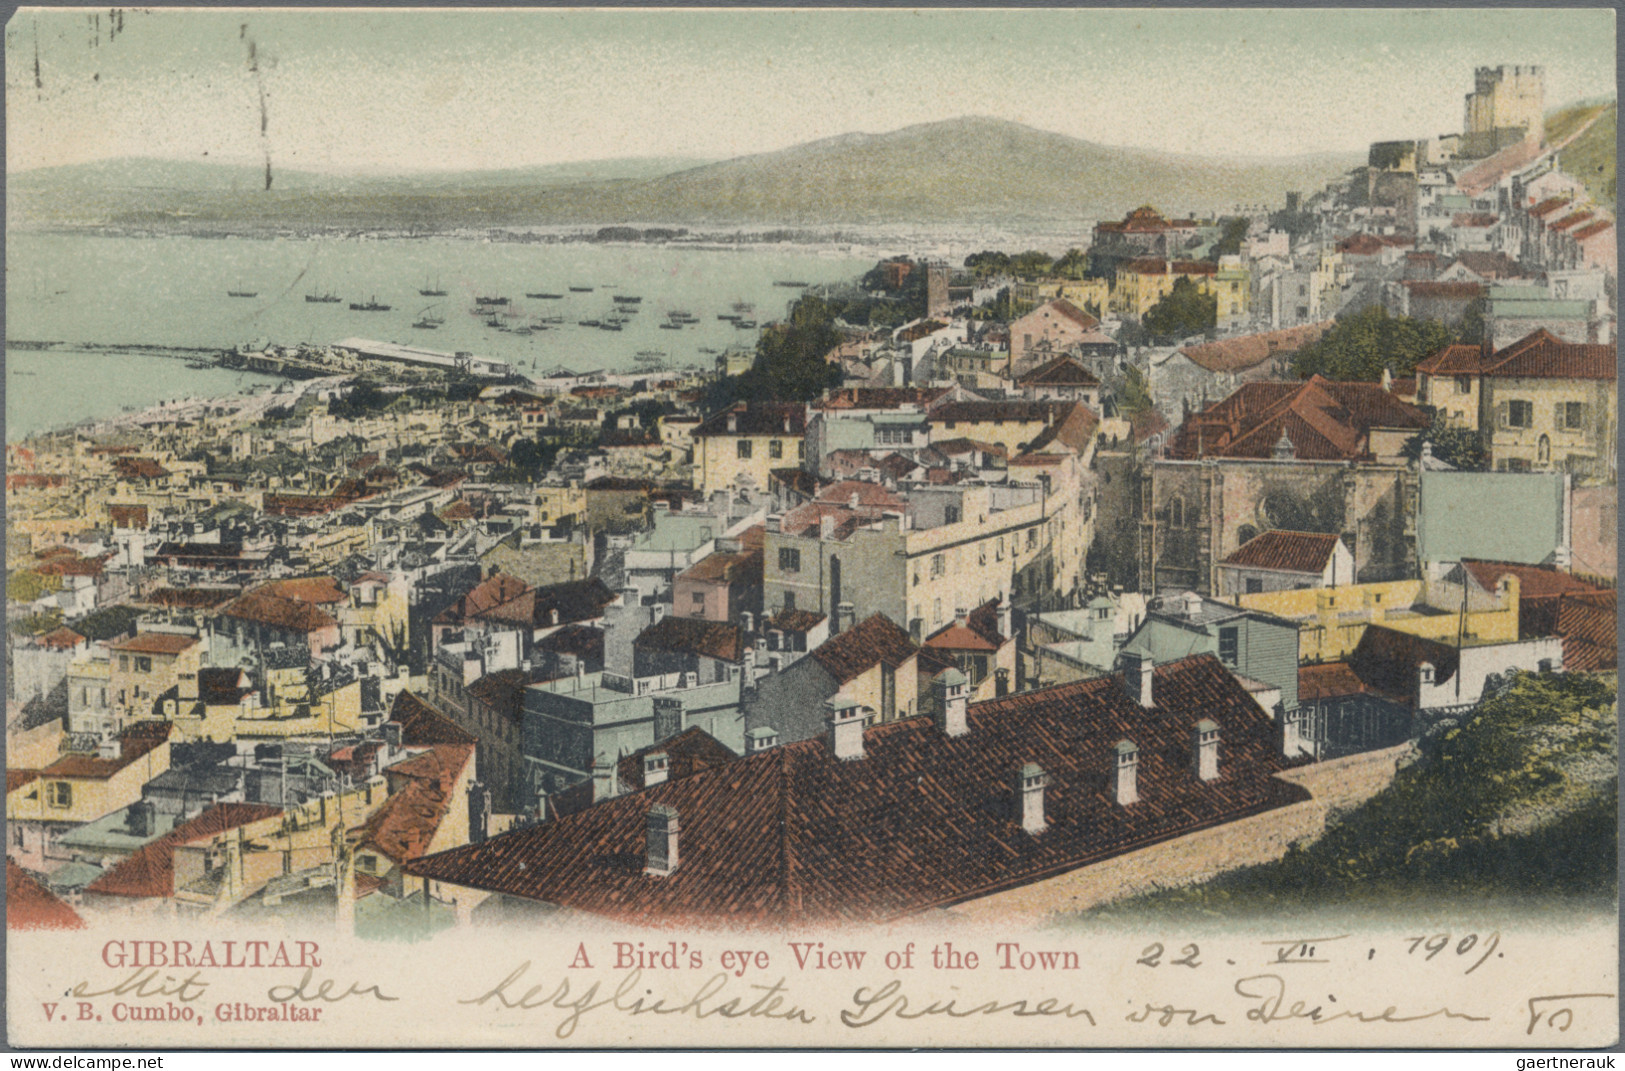 Gibraltar: 1840/1940's: 18 covers, postcards and postal stationery items sent fr